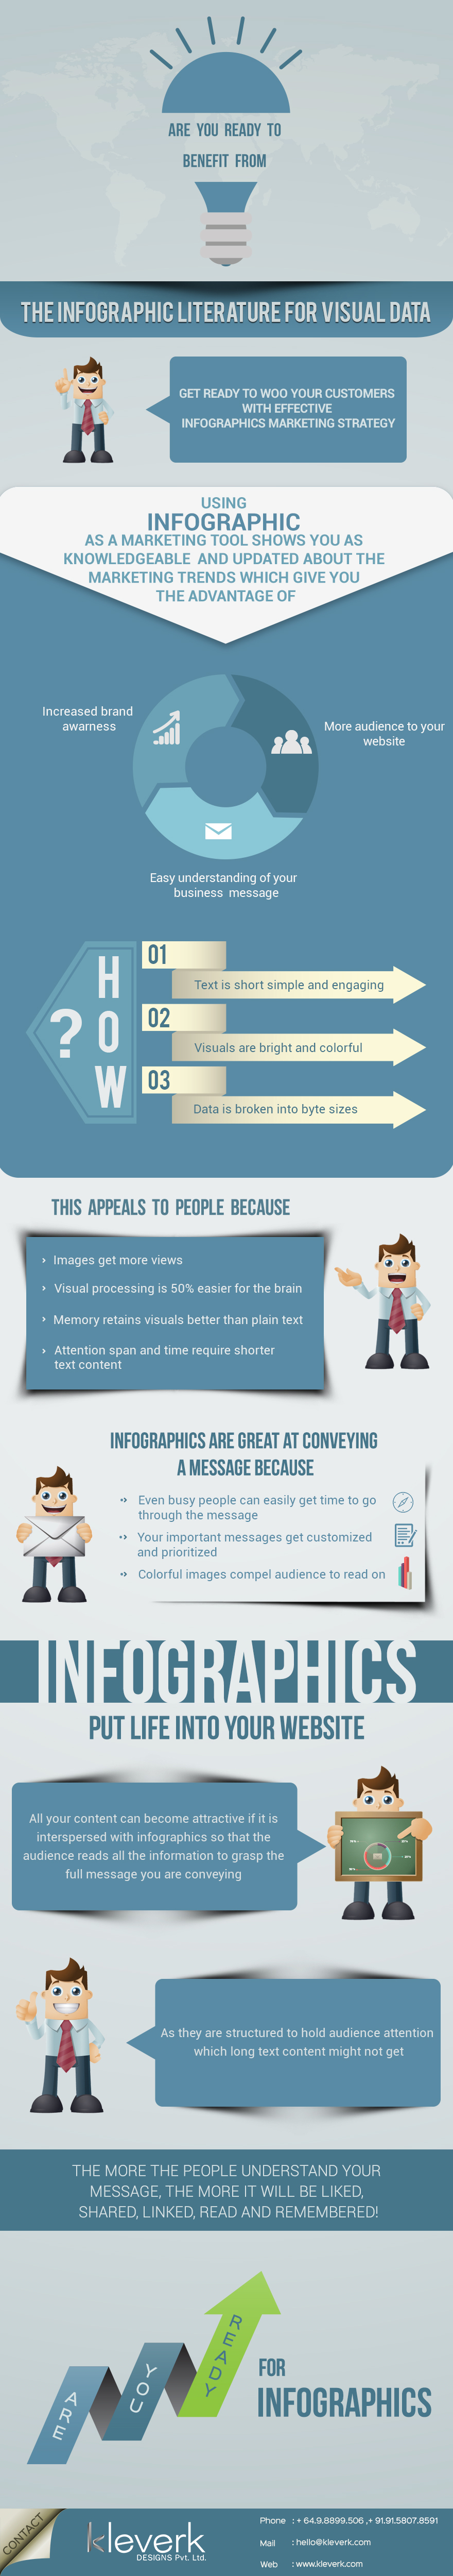 How to Effectively Use Infographics as a Marketing Strategy